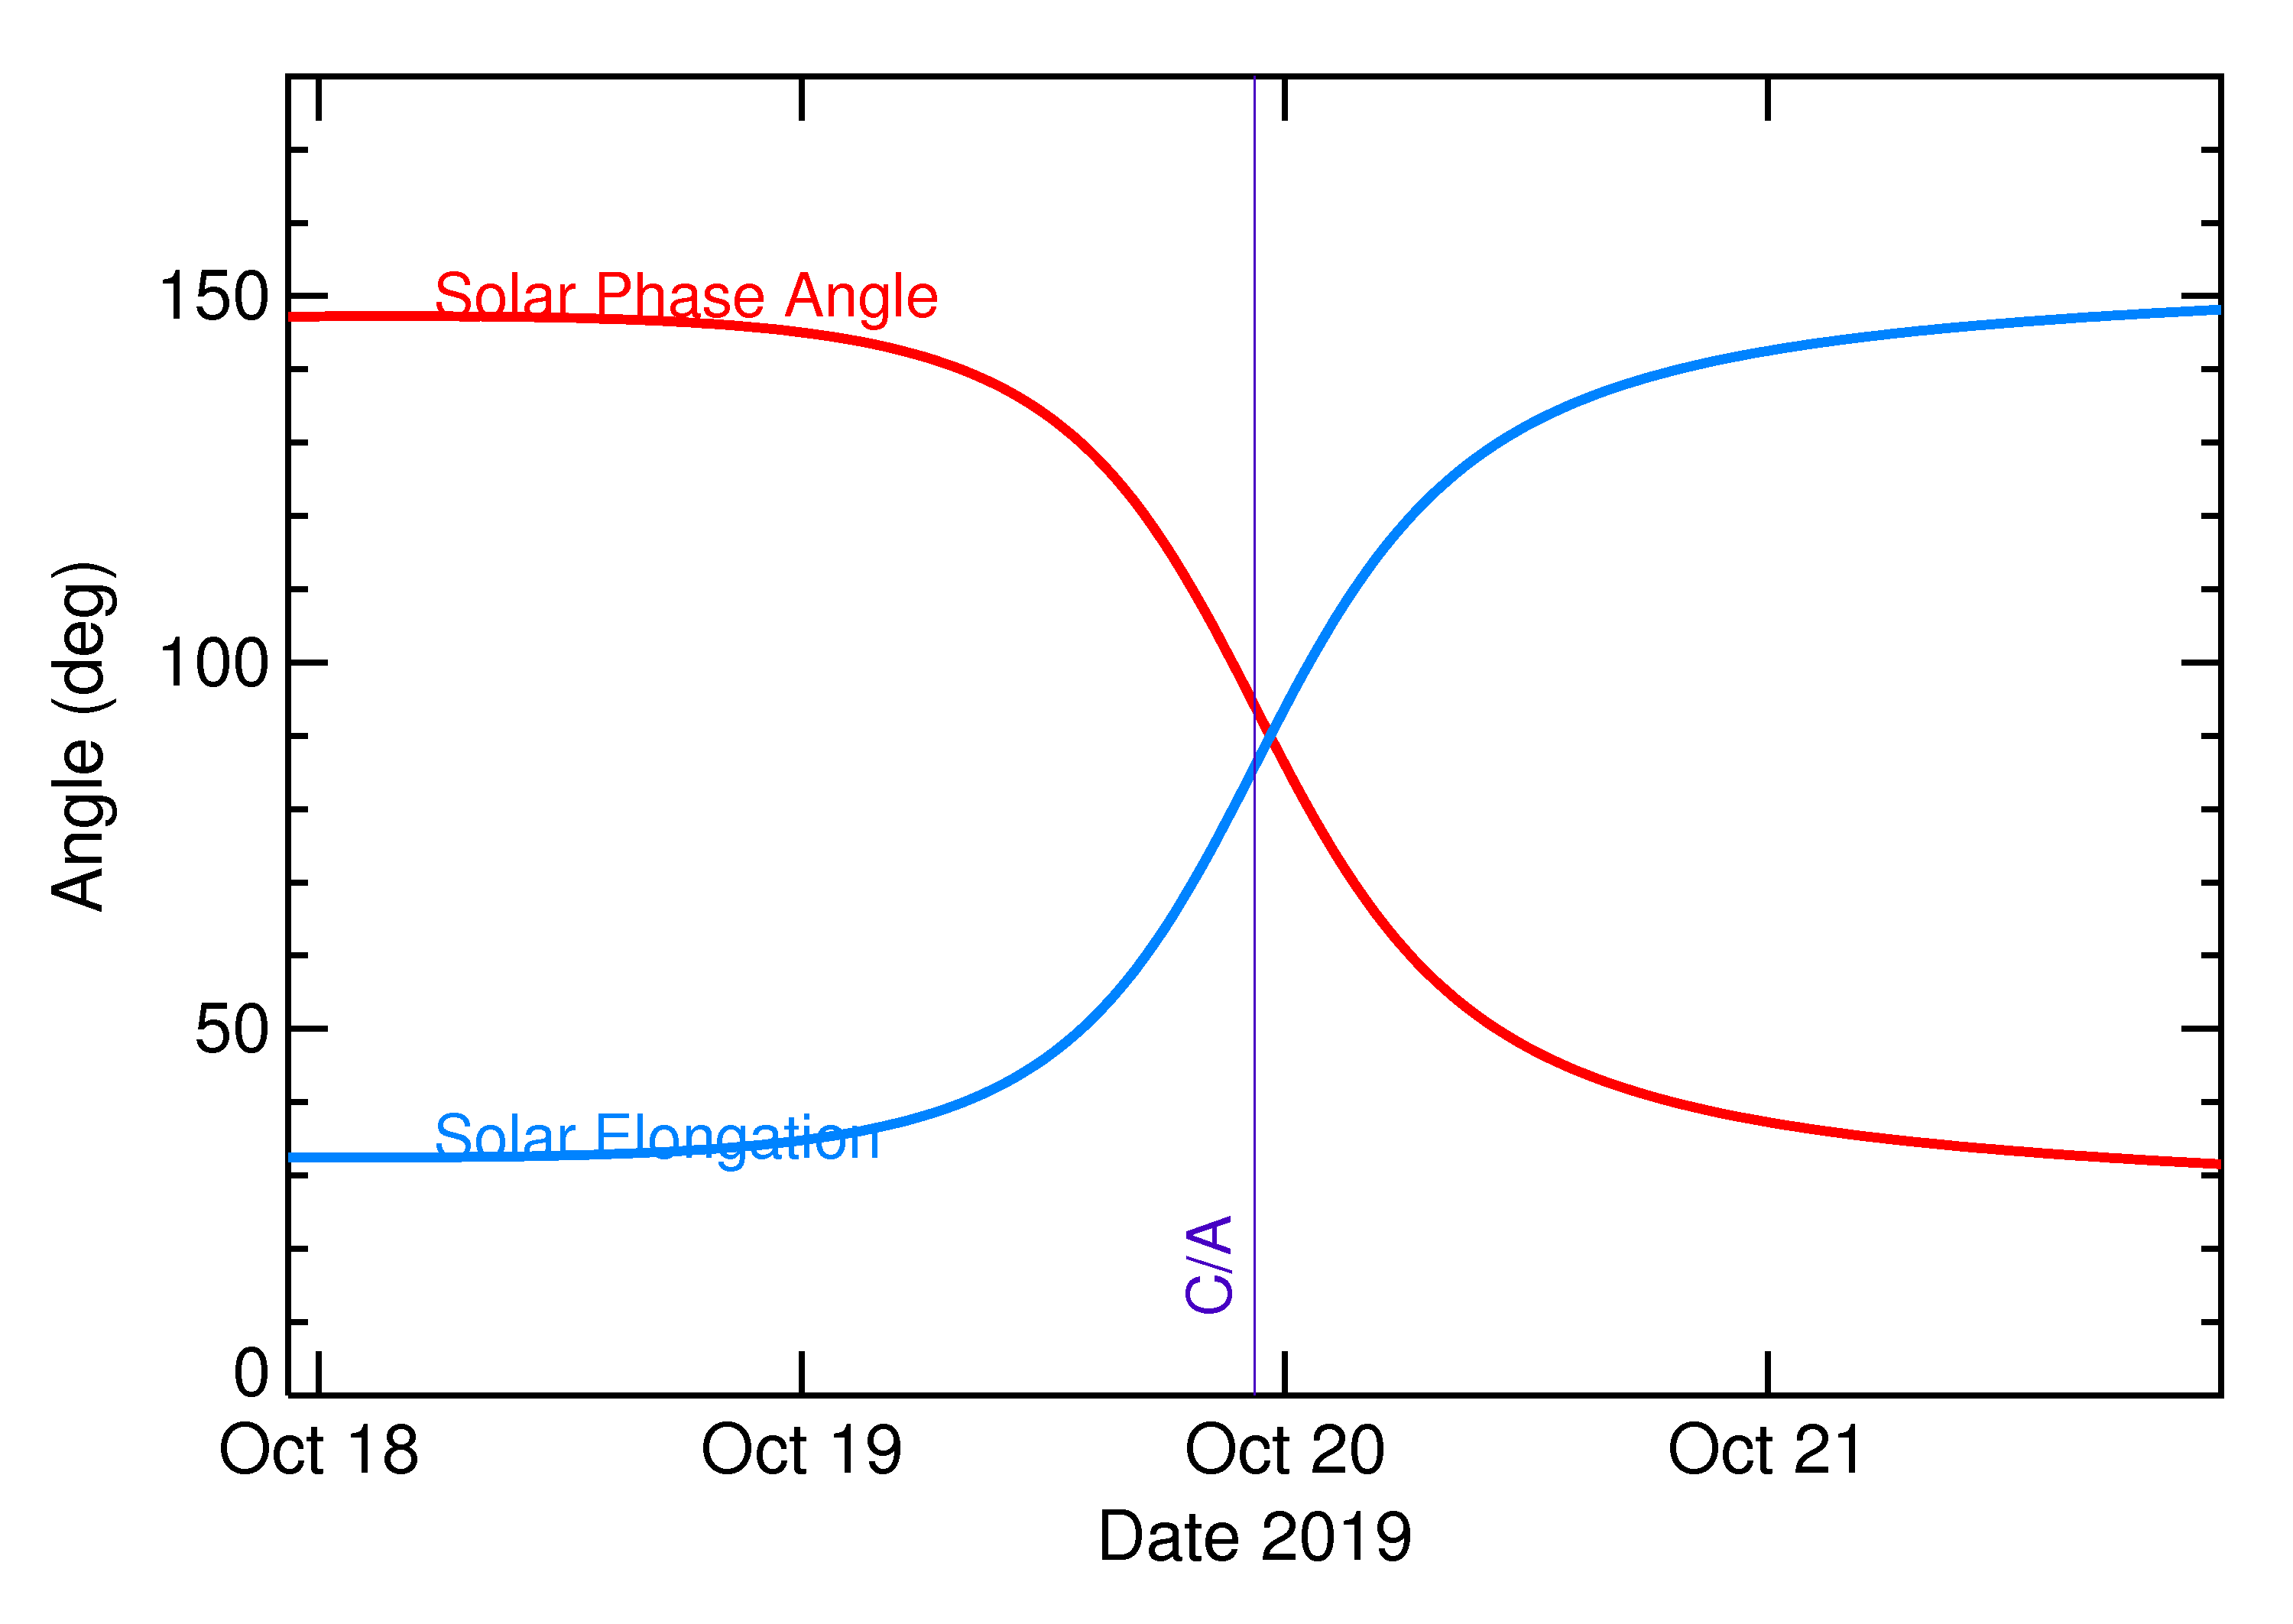 Solar Elongation and Solar Phase Angle of 2019 UL3 in the days around closest approach